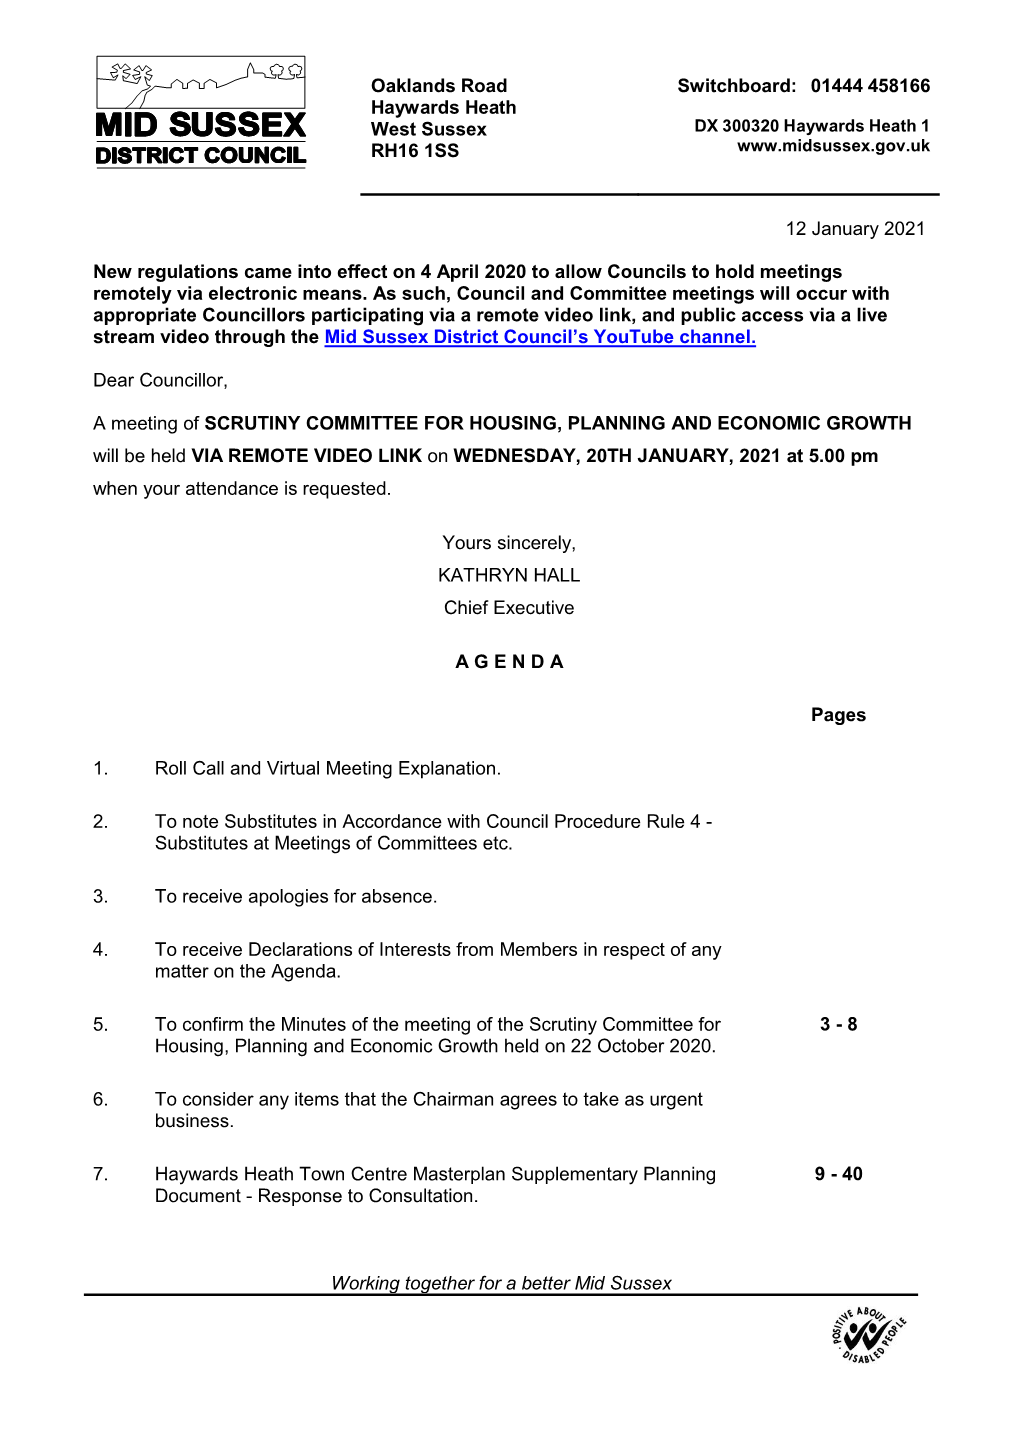 (Public Pack)Agenda Document for Scrutiny Committee for Housing